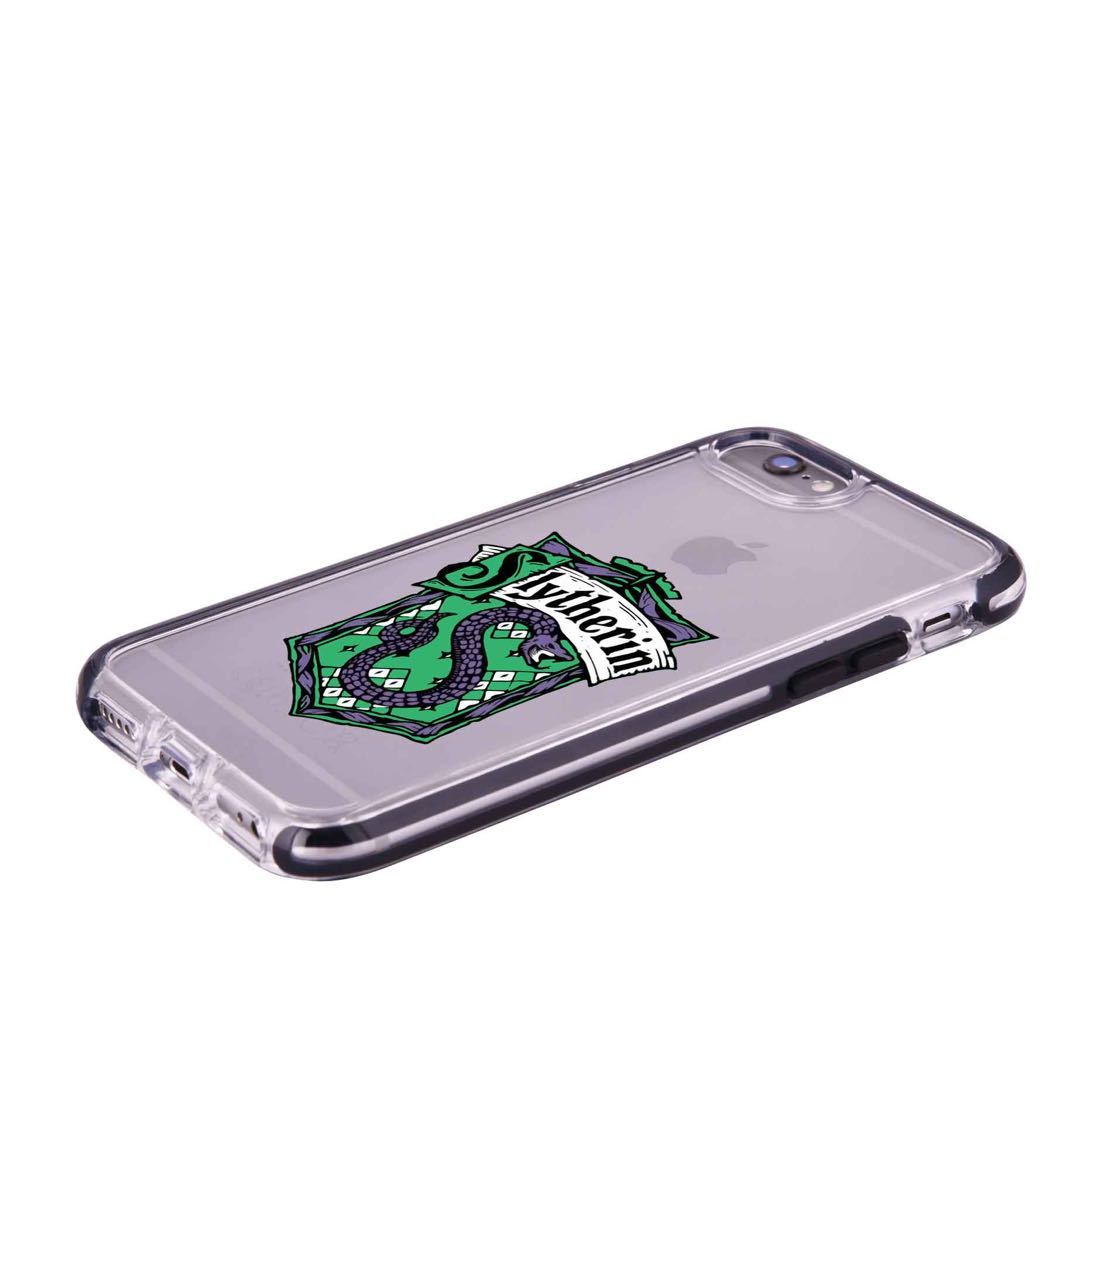 Crest Slytherin - Extreme Phone Case for iPhone 6S